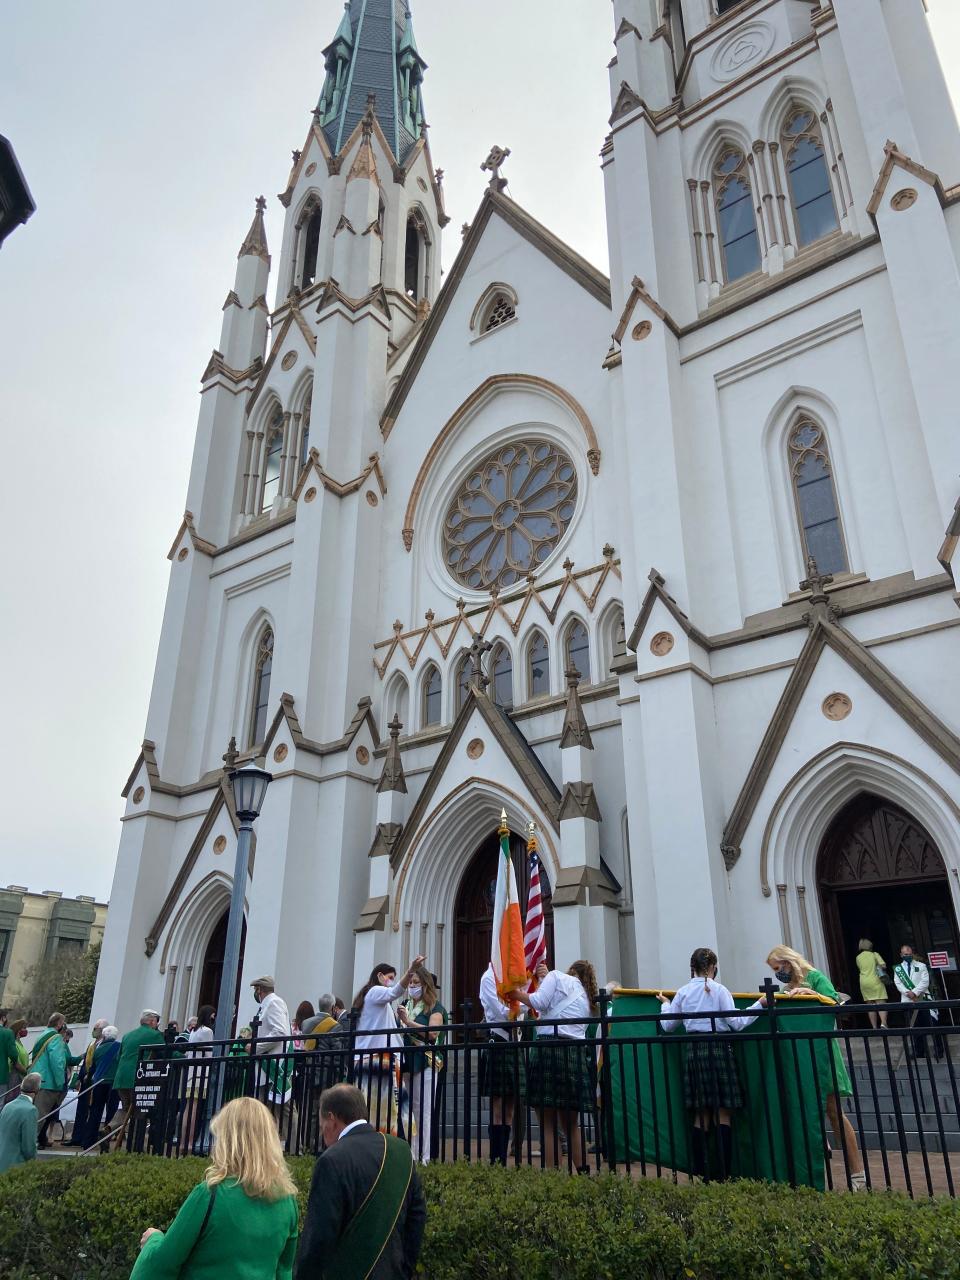 Photos from the St. Patrick’s Day Mass at Basilica Cathedral of St. John the Baptist